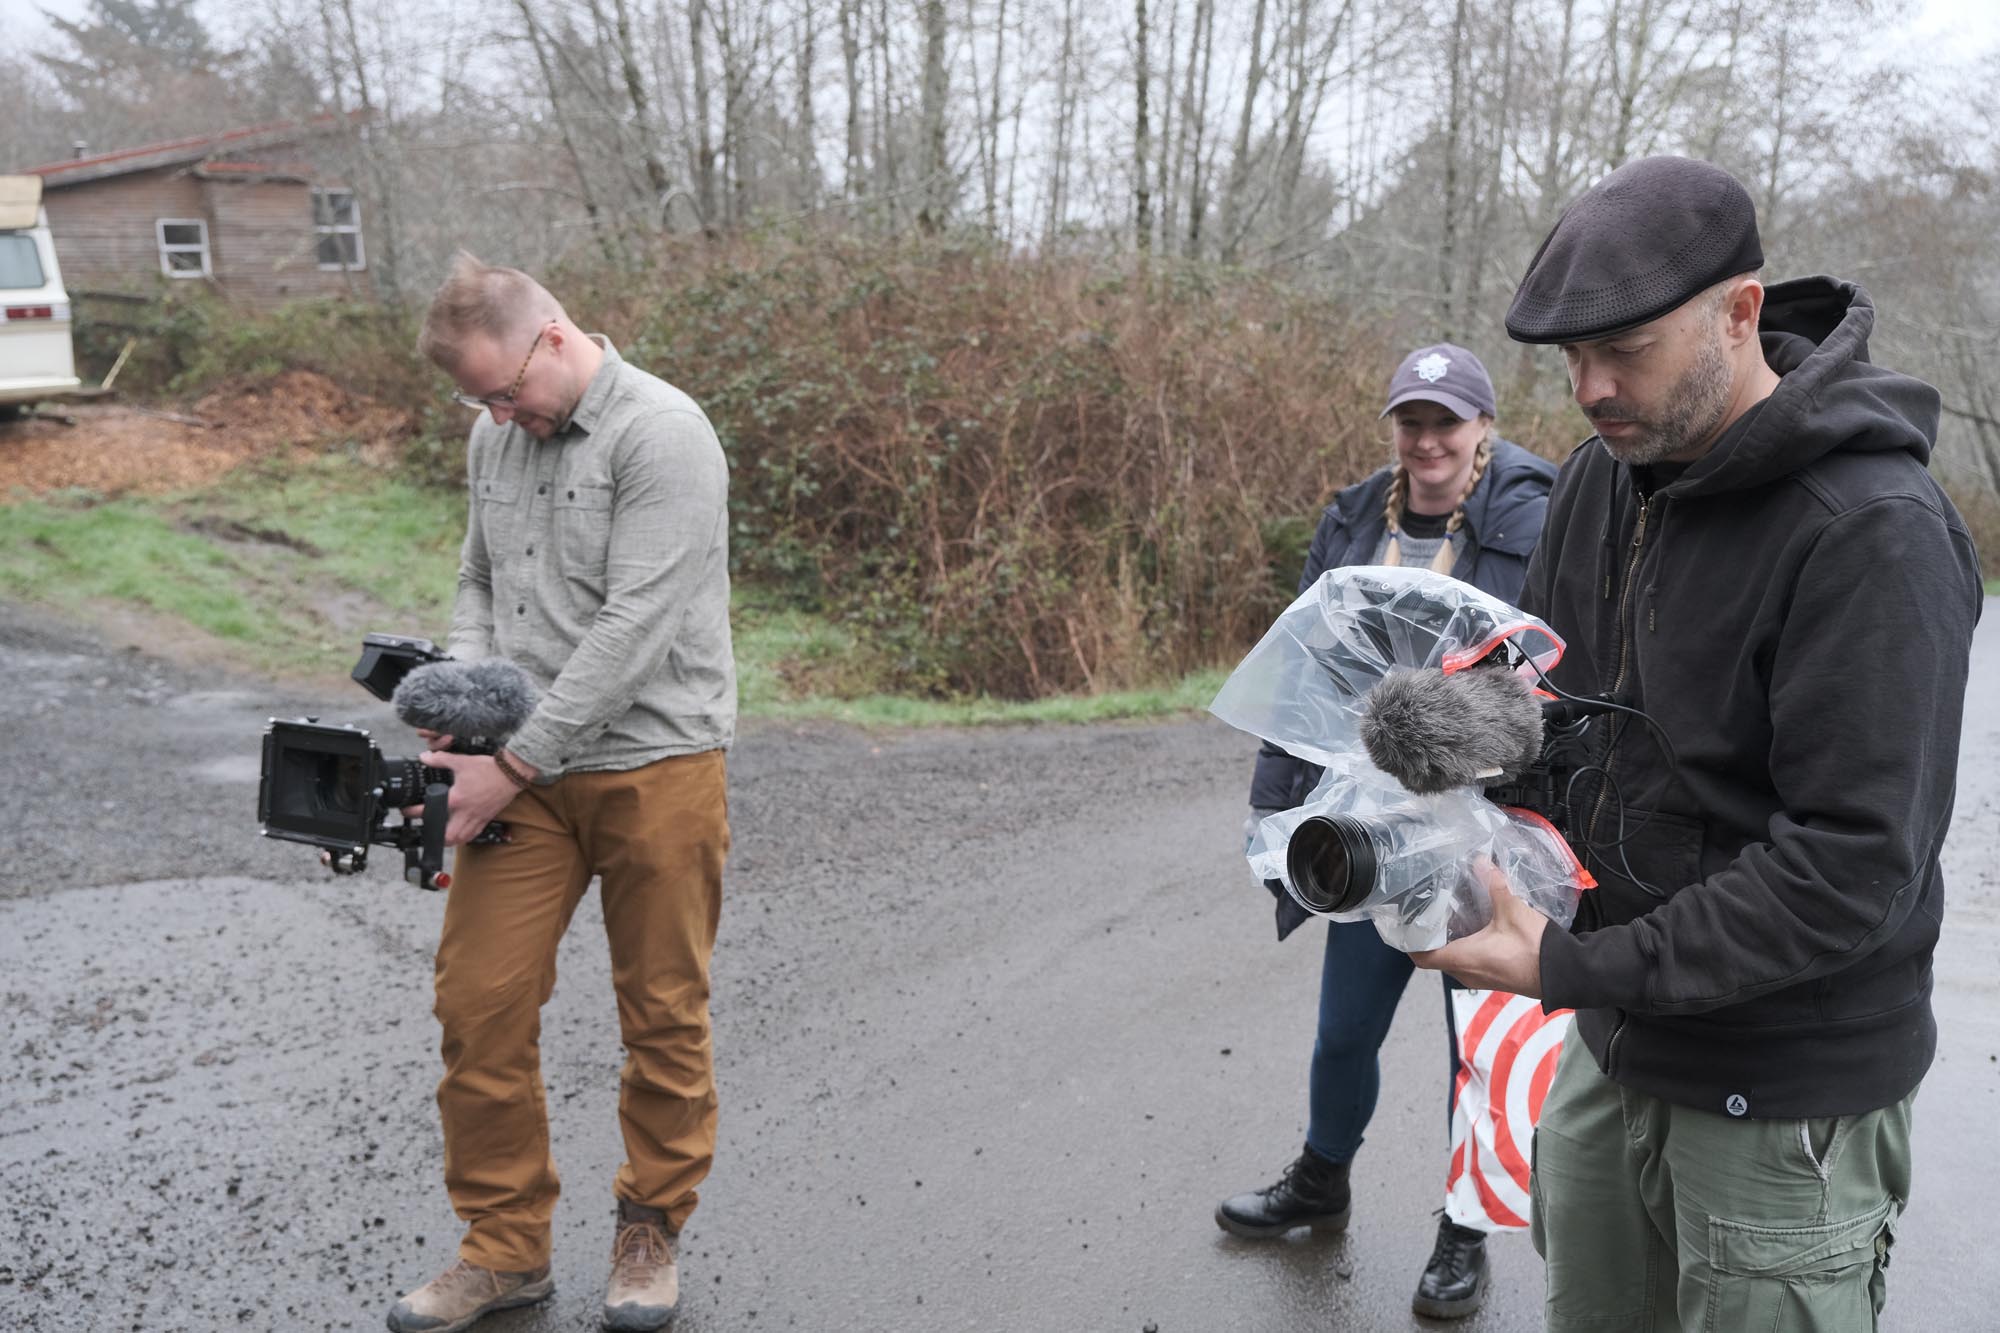 Three members of a film crew prepare for a shot on a countryside lane